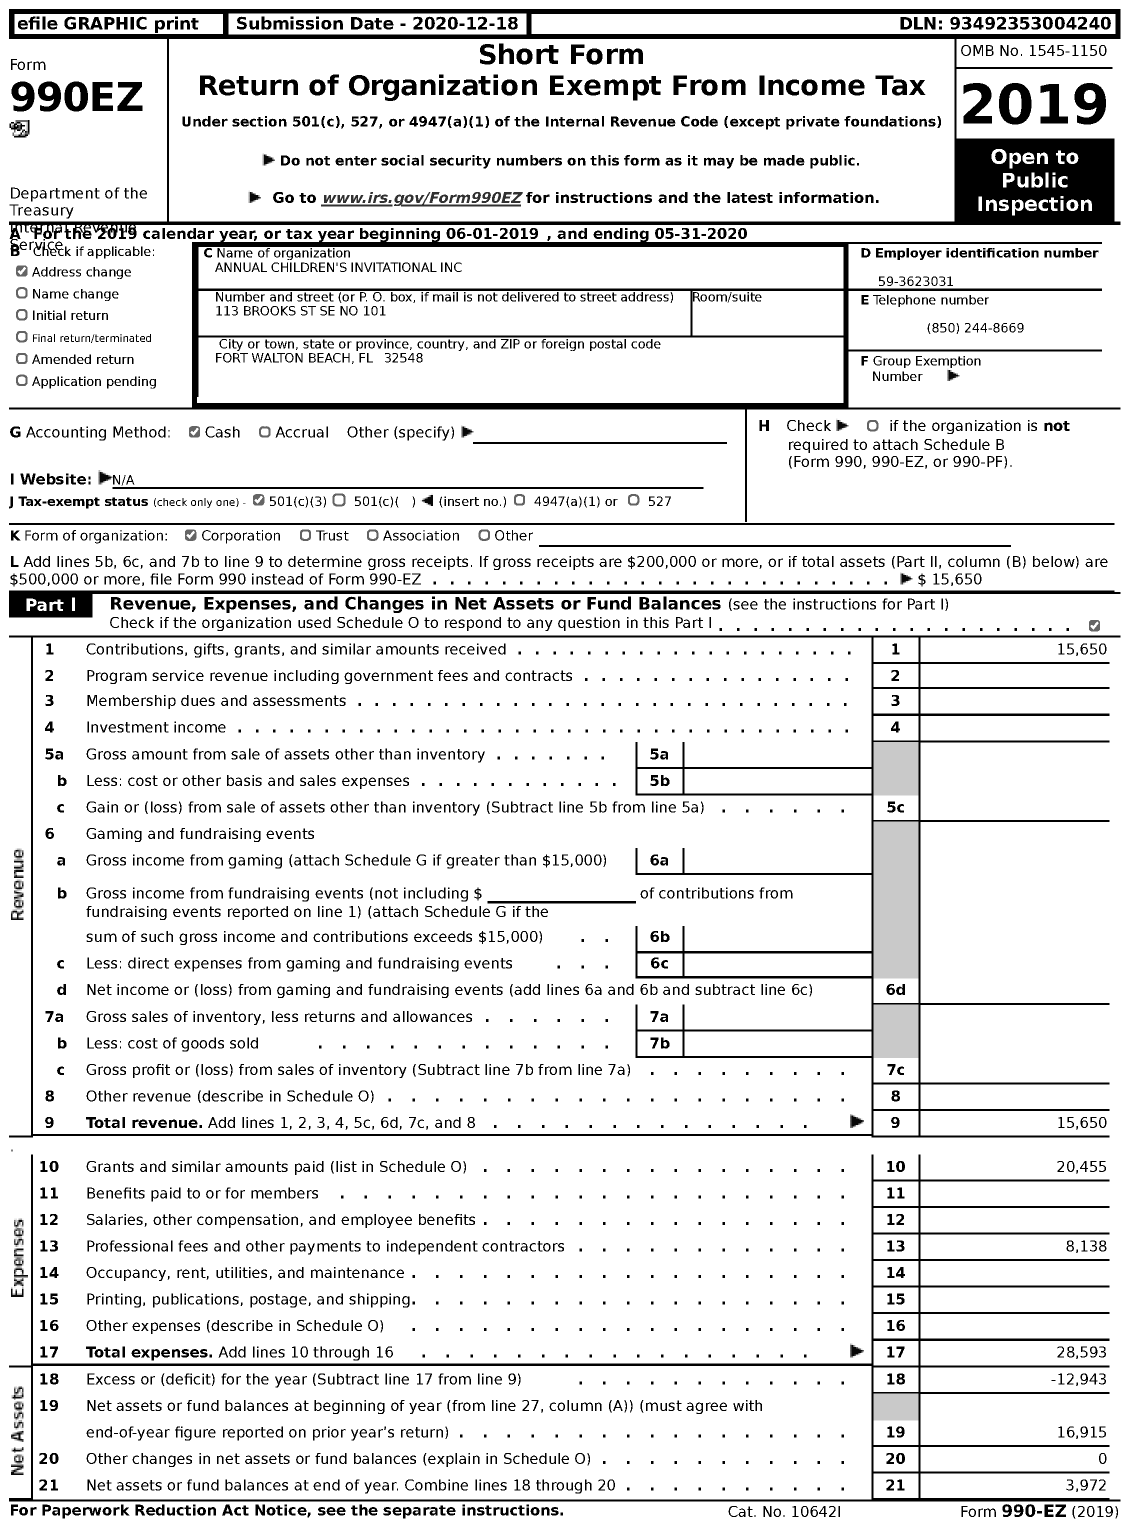 Image of first page of 2019 Form 990EZ for Annual Children's Invitational